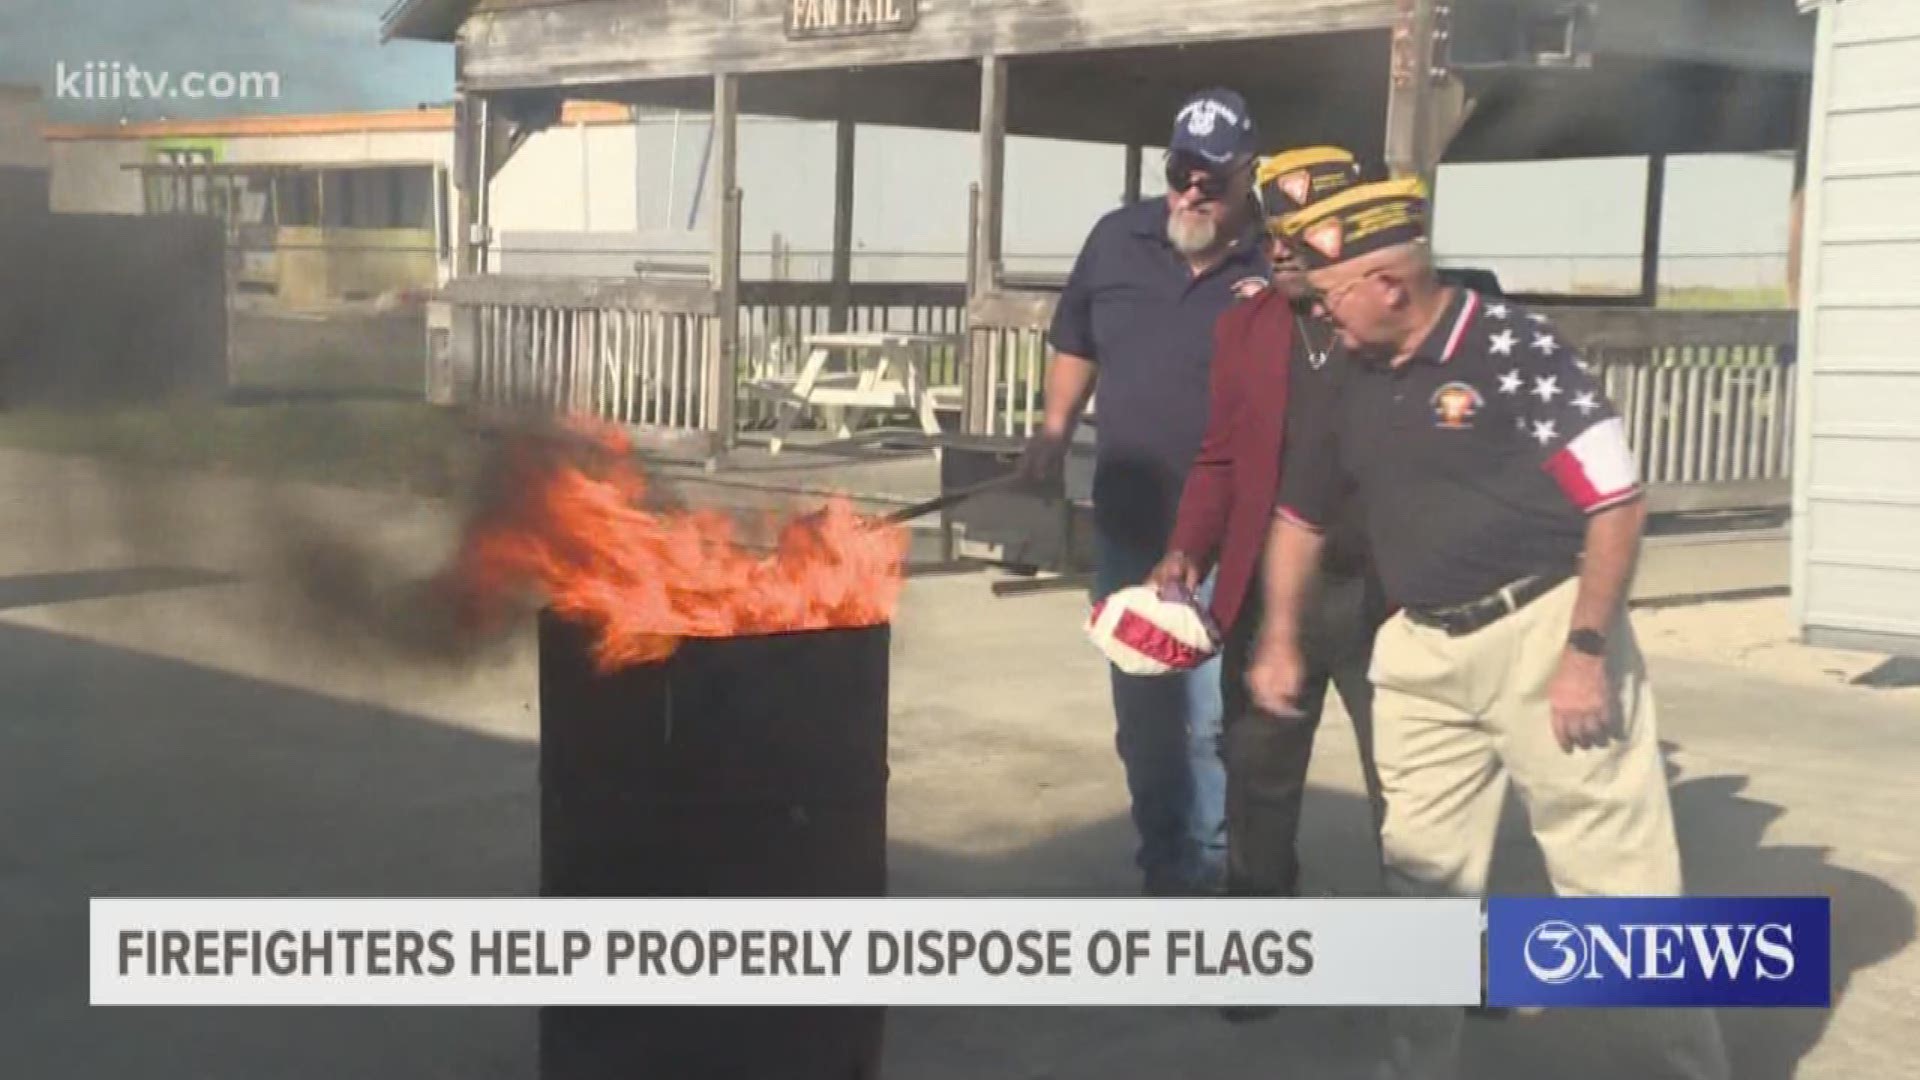 The Corpus Christi chapter of the Fleet Reserve Association held a special flag burning ceremony Friday afternoon in Flour Bluff.